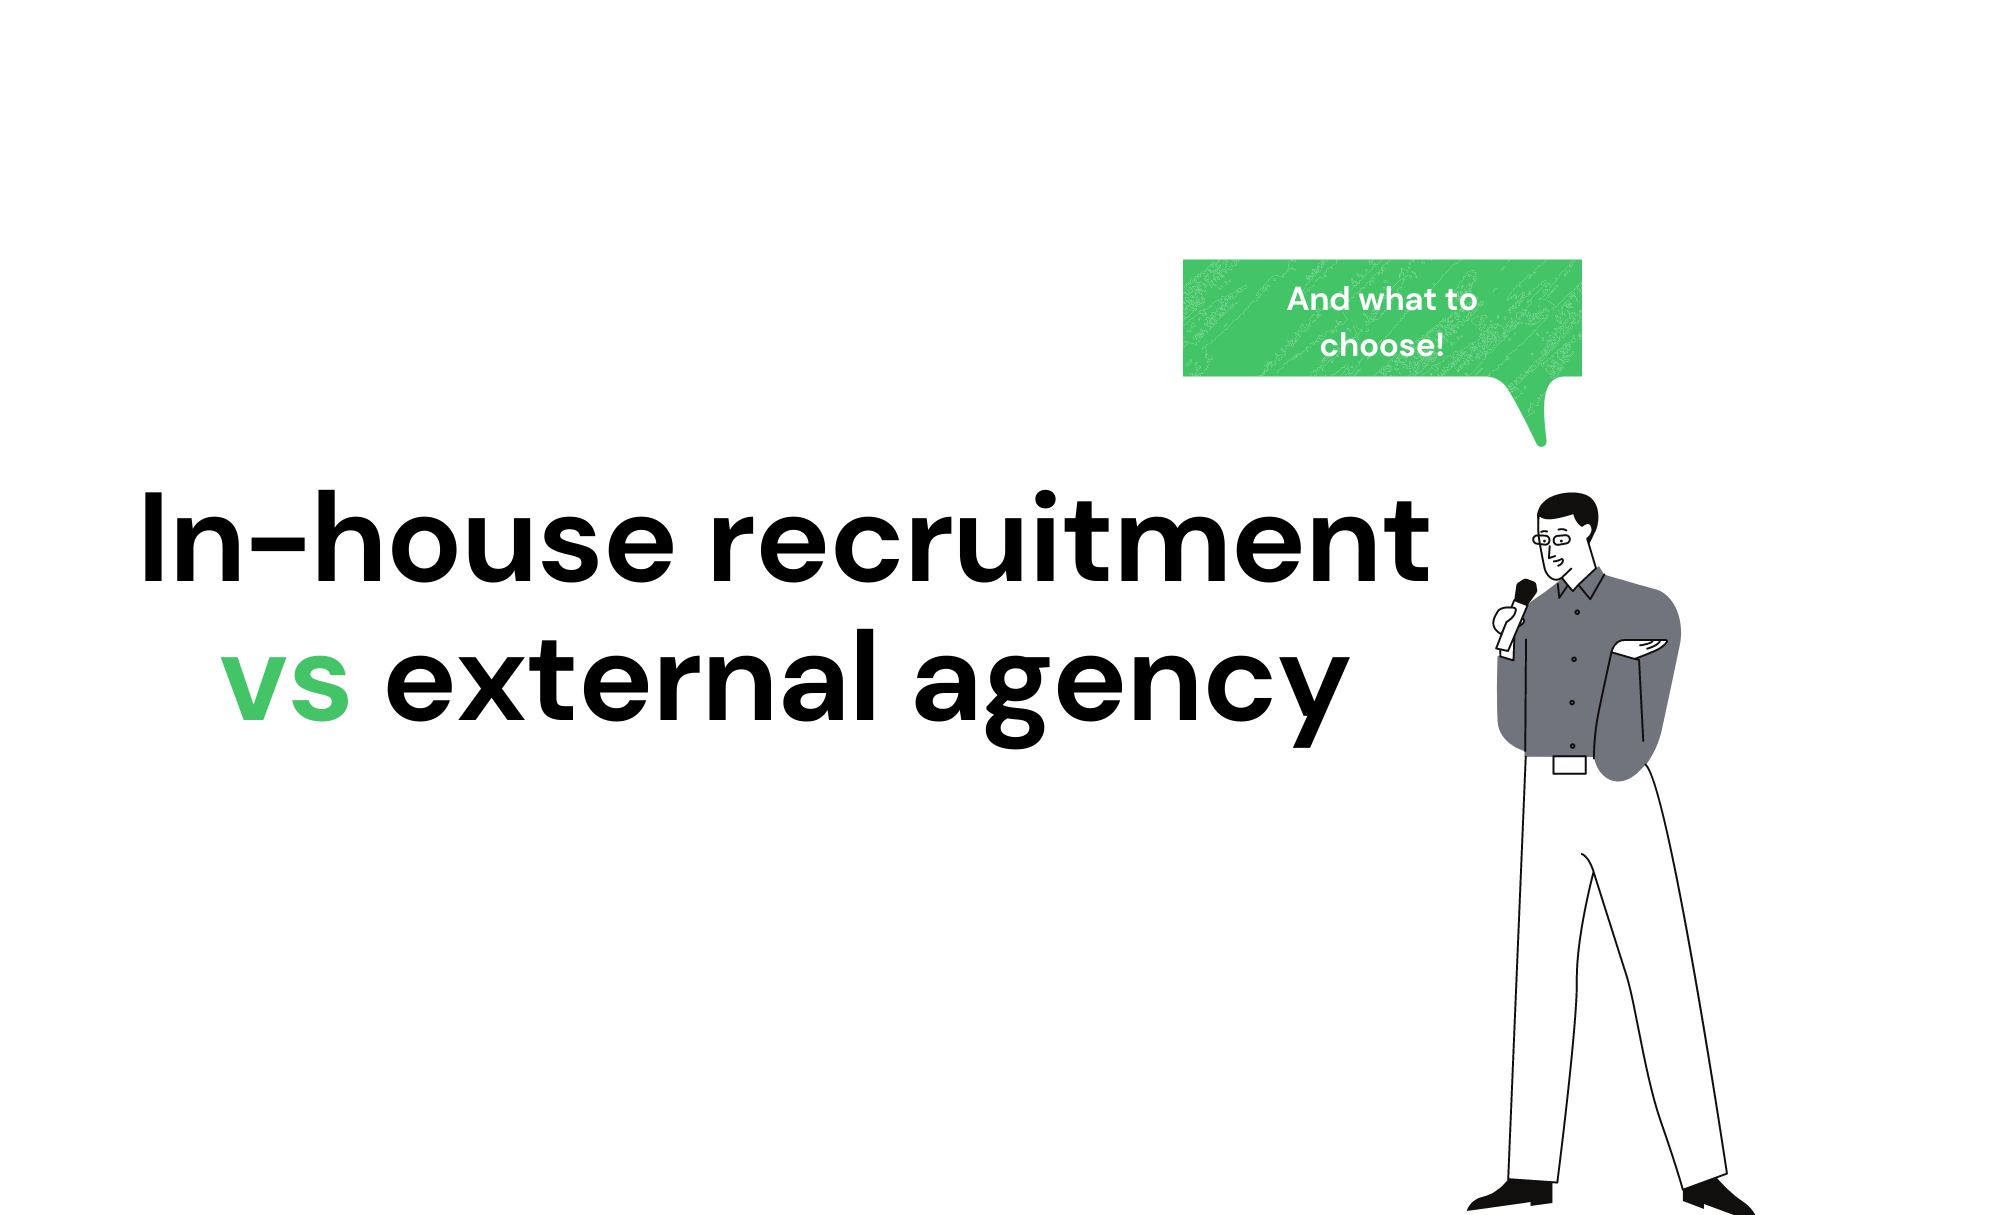 In house recruitment vs external agency - the pros and cons and what to choose